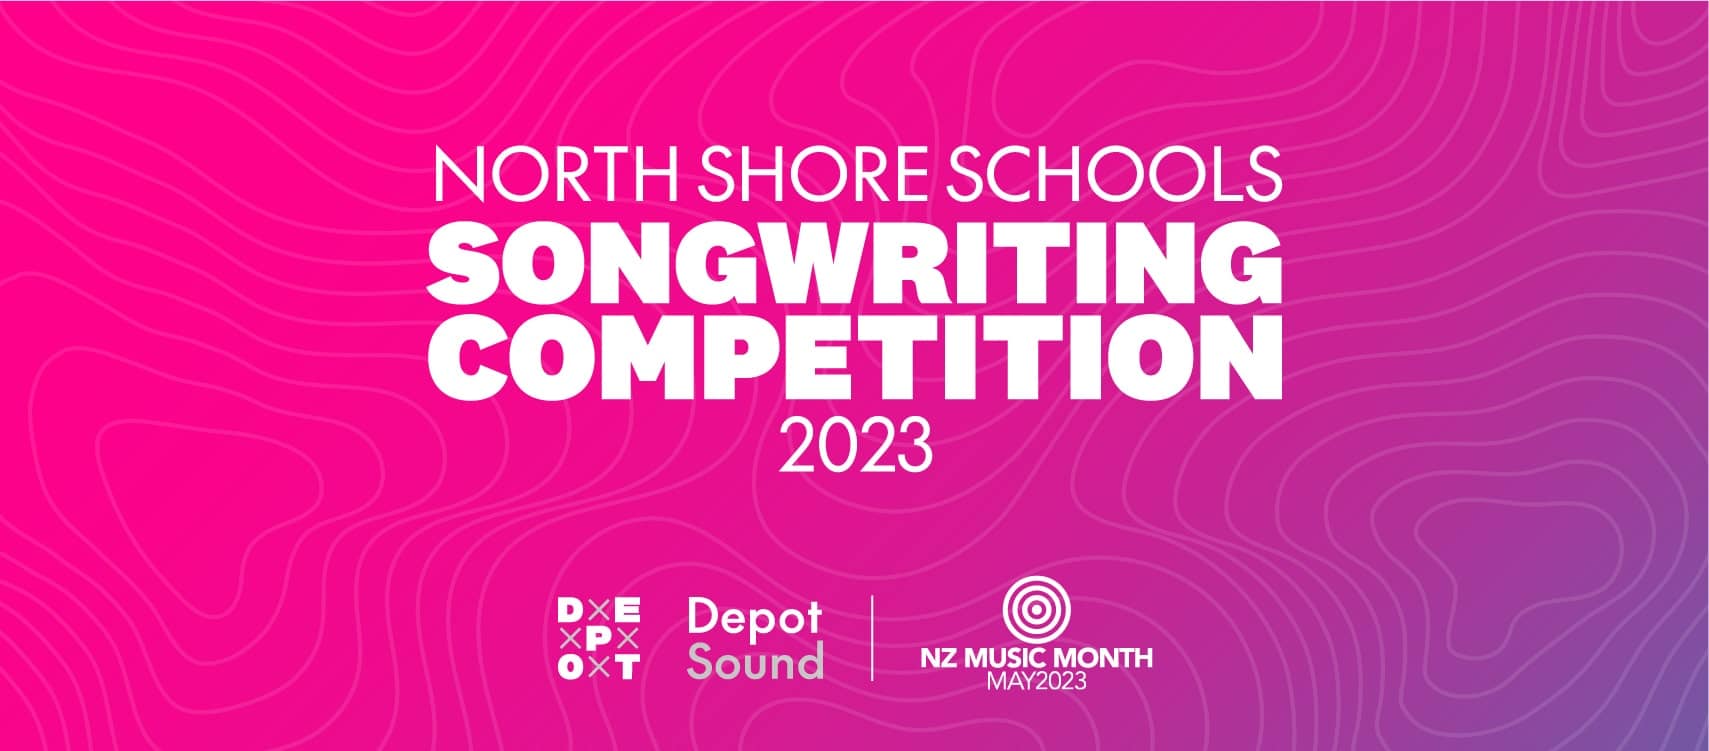 Banner image for DEPOT Sound's North Shore Schools Songwriting Competition 2023, as part of NZ Music Month 2023.